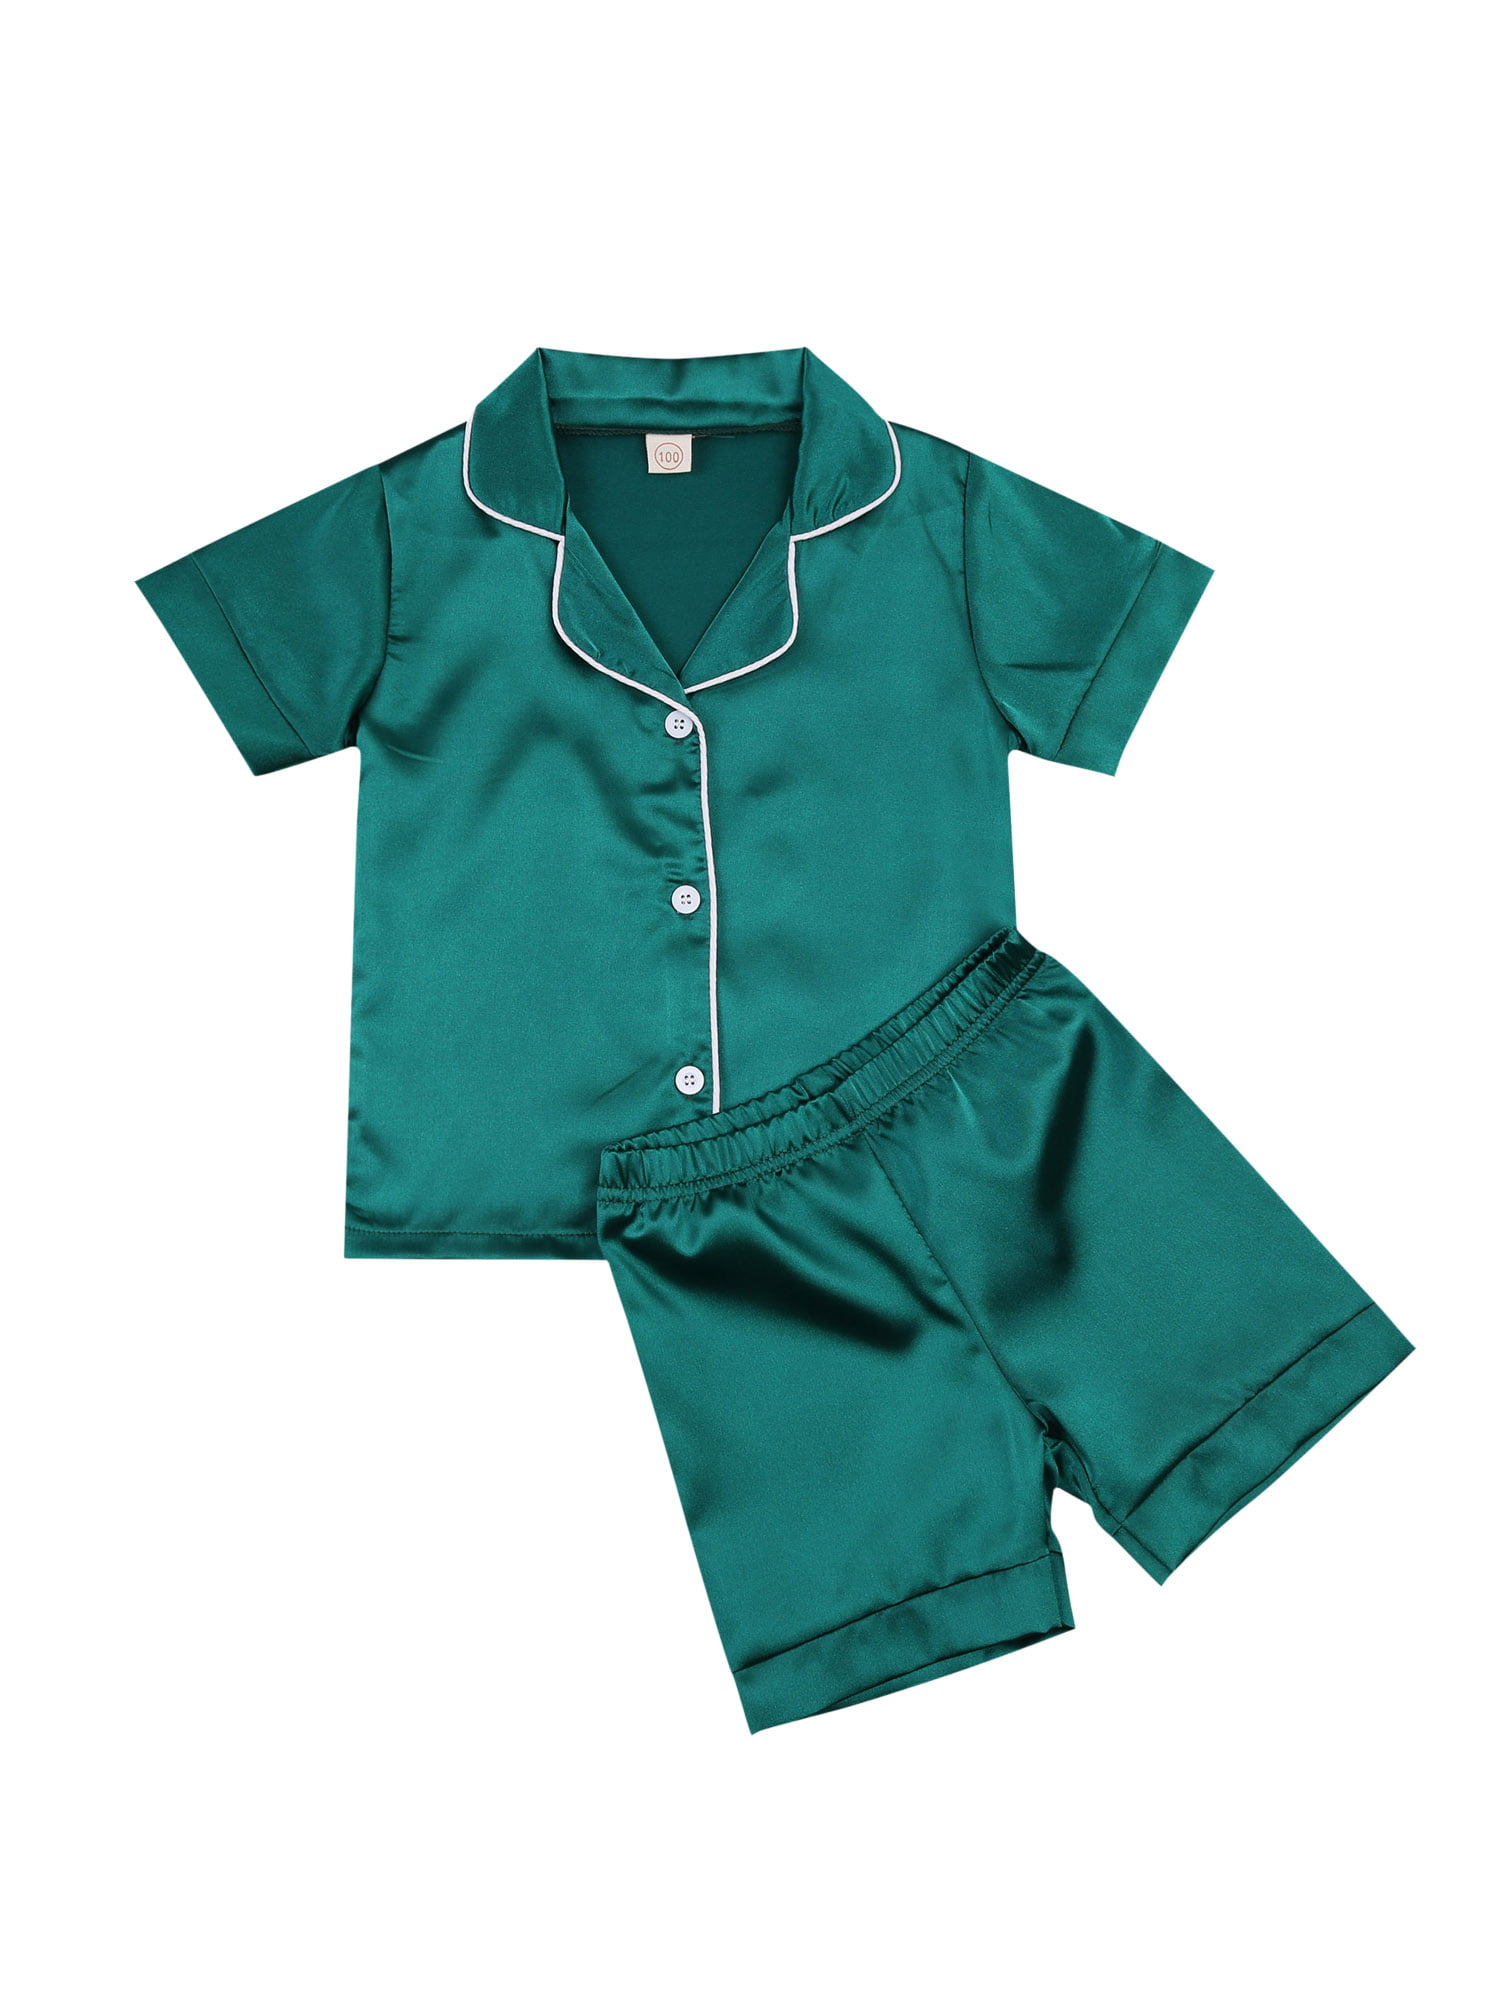 N/ D Children Two-Piece Nightwear Set Short Sleeve Turn-Down Collar Tops and Shorts